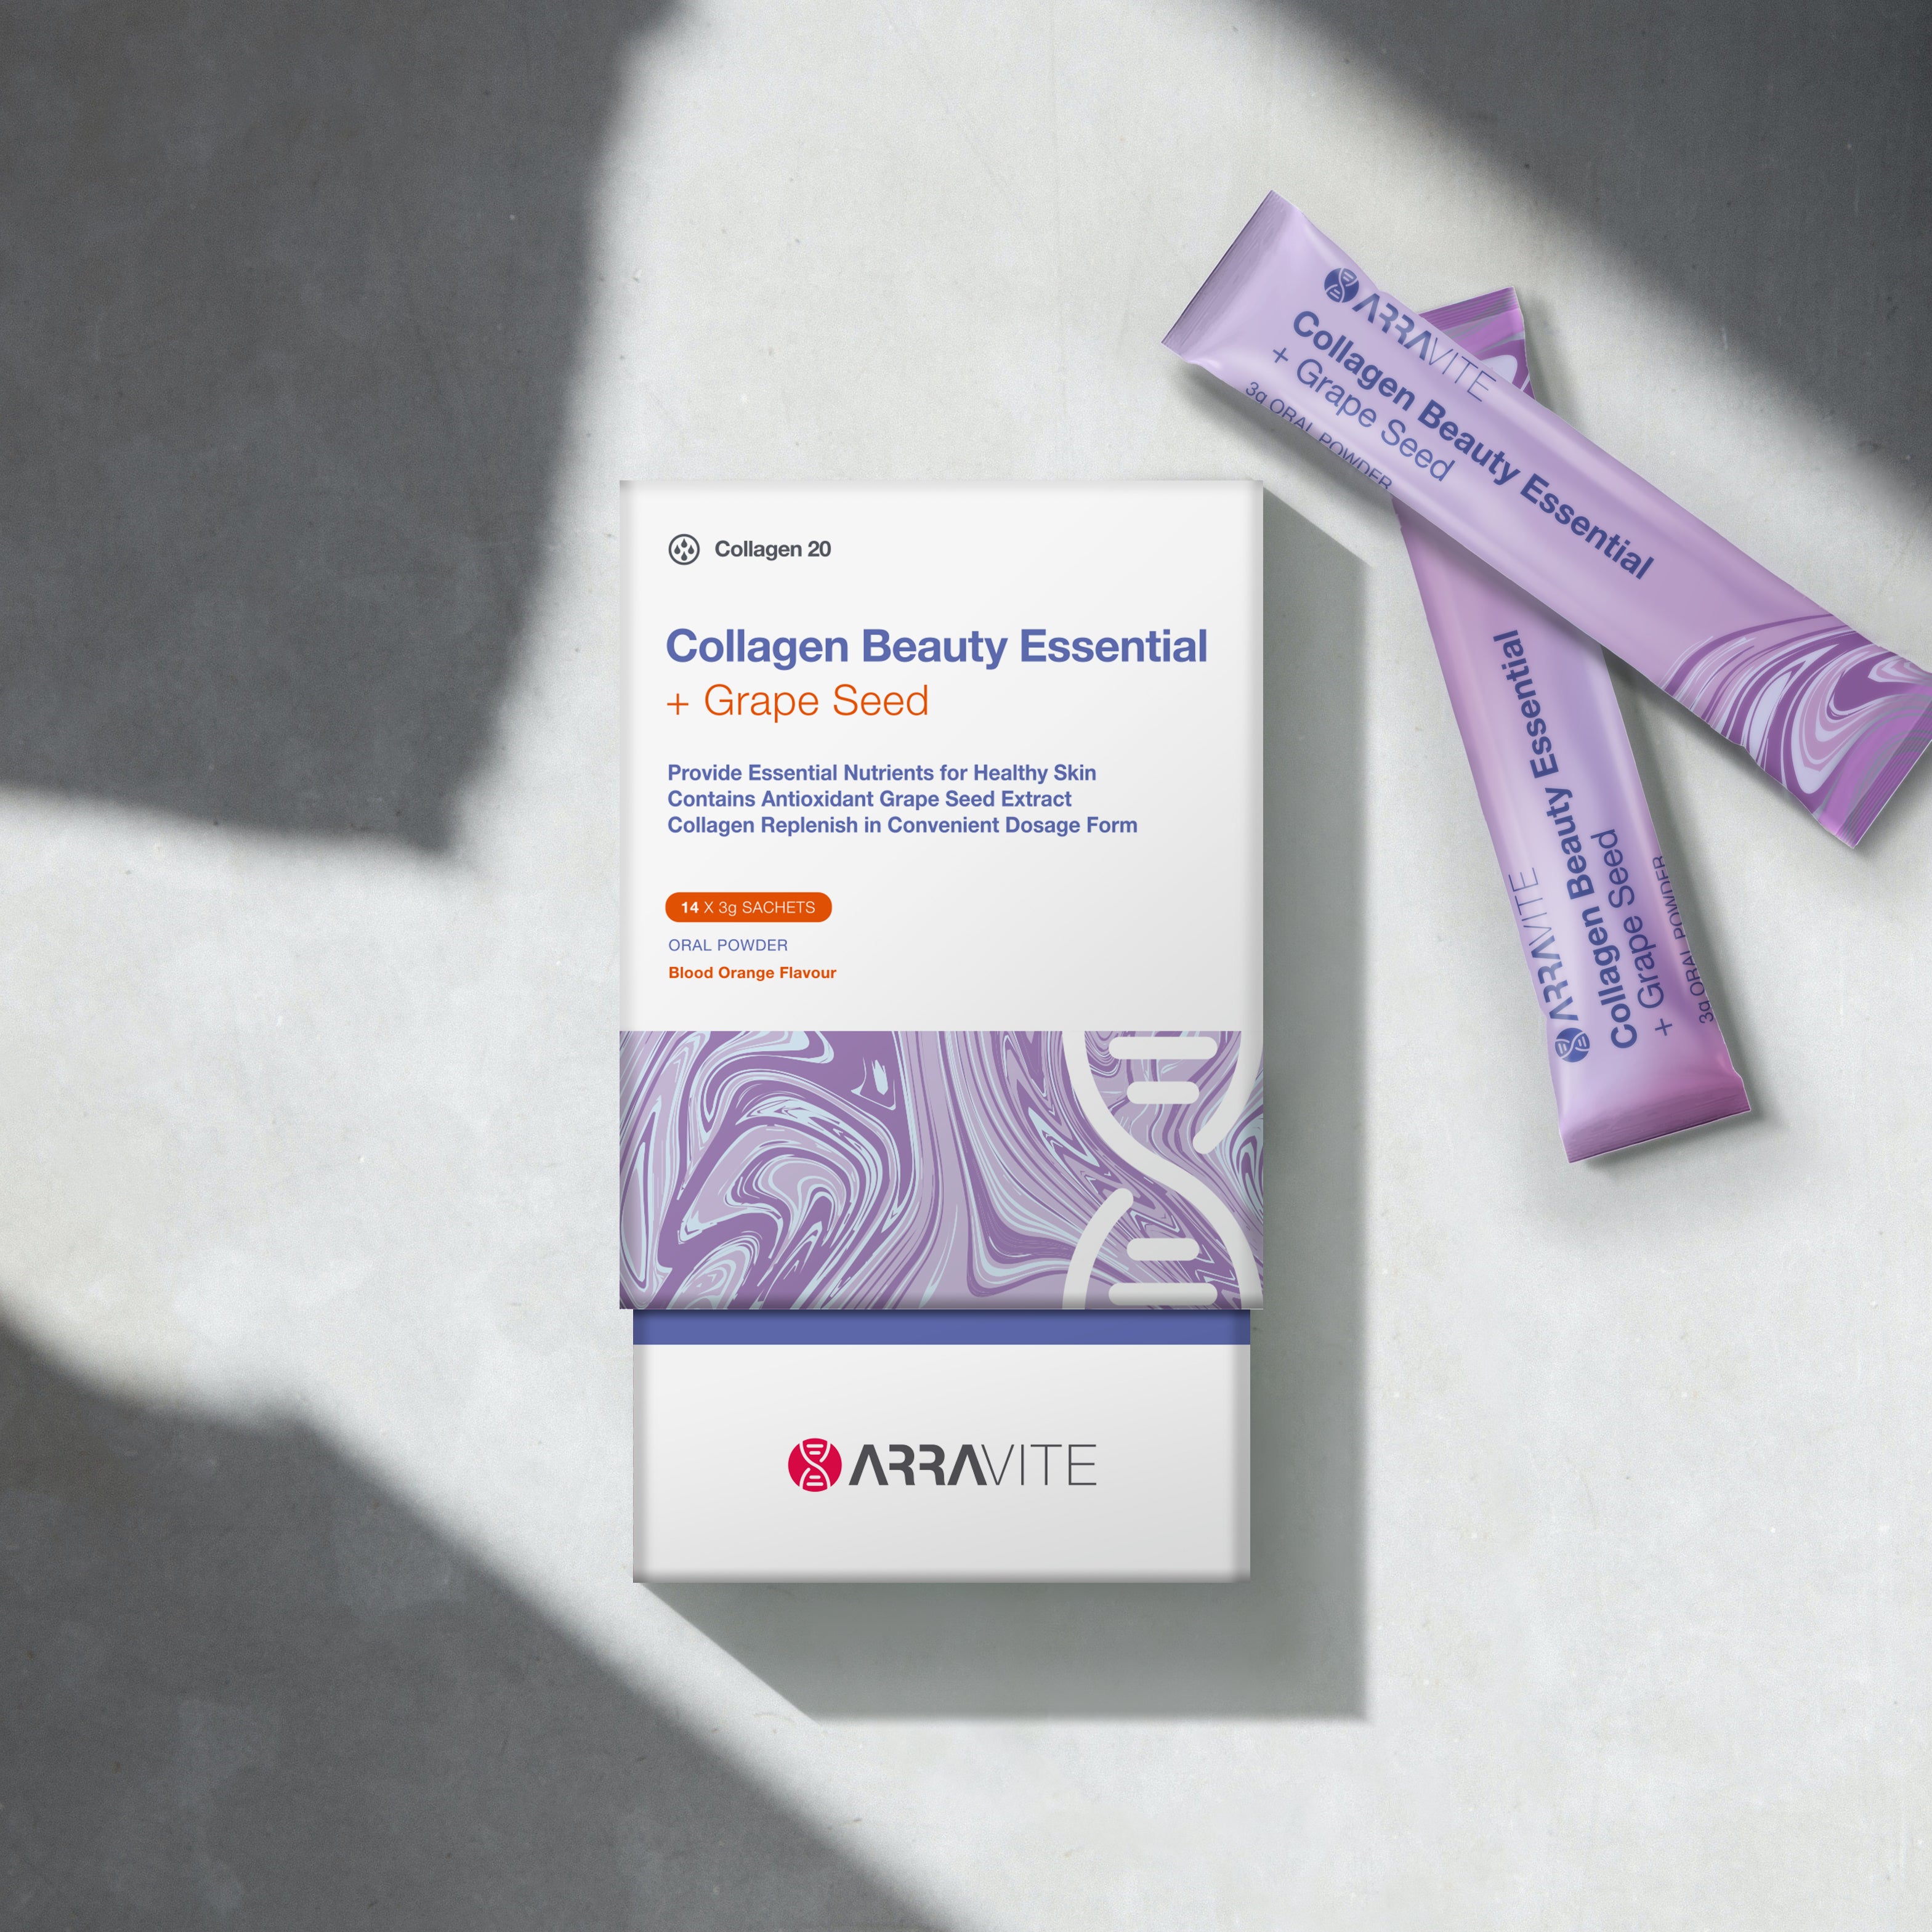 Collagen Beauty Essential + Grape Seed